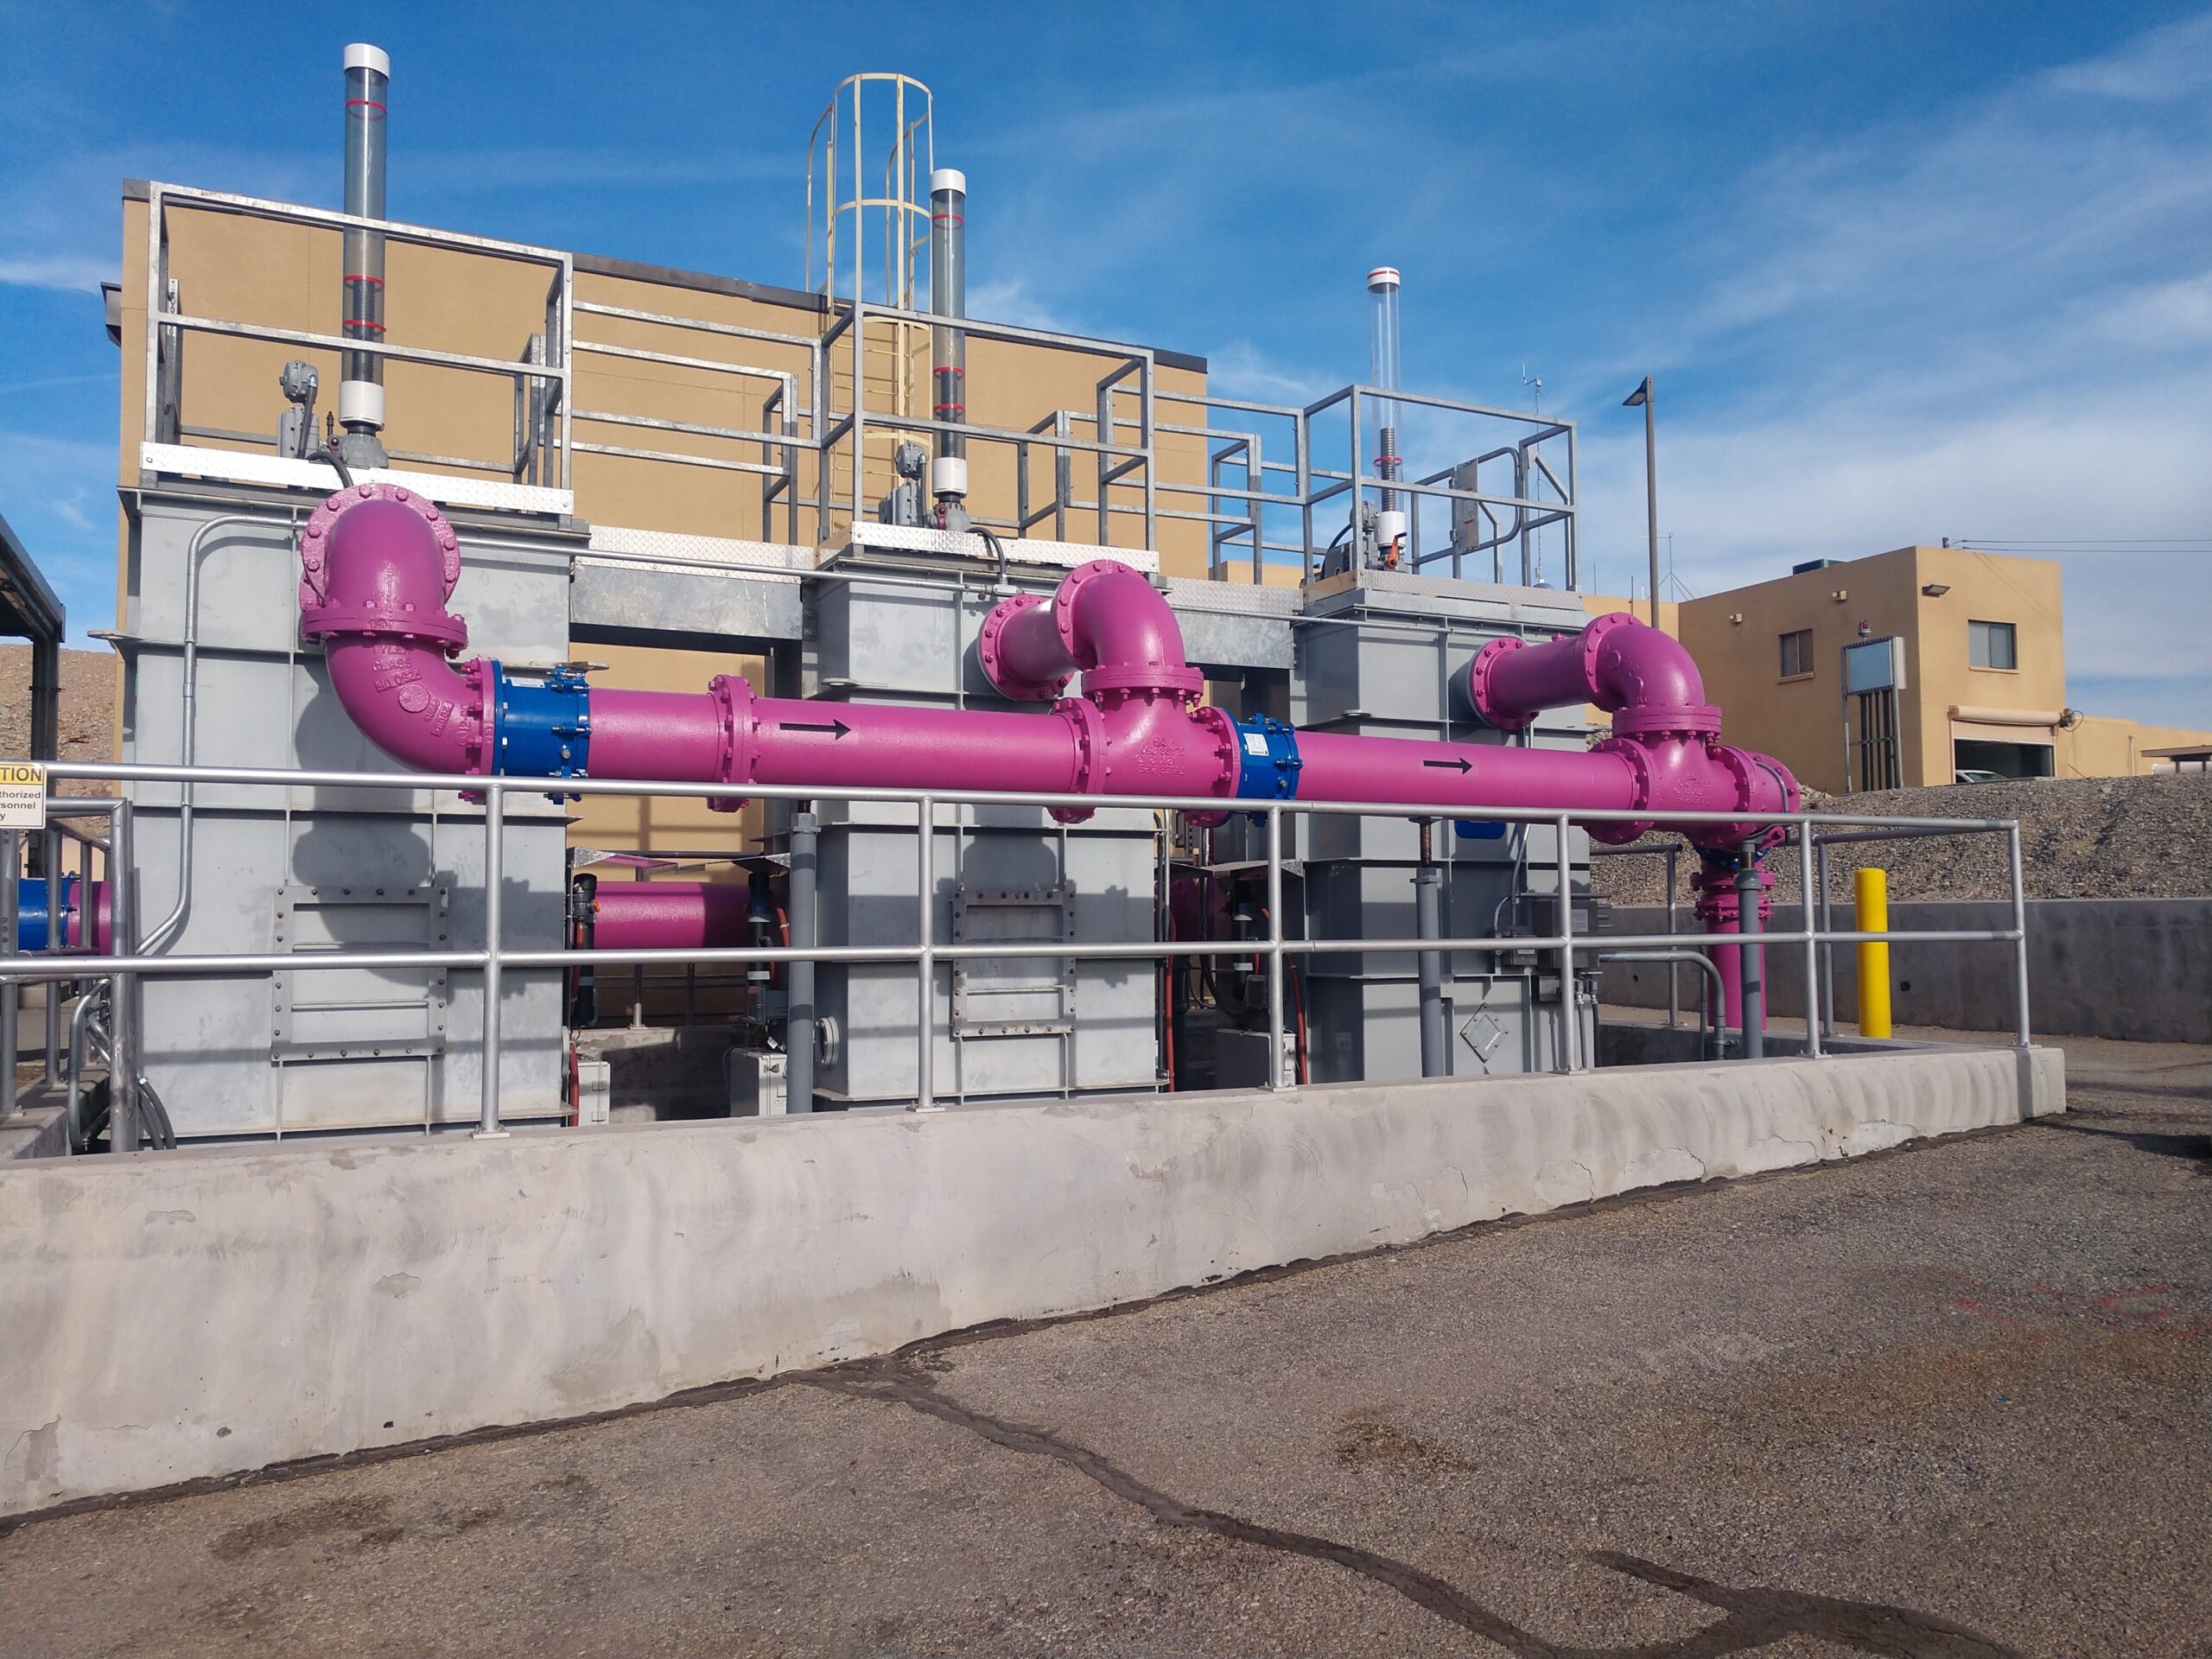 Industrial water treatment facility in Lake Havasu City with large pink pipes and steel structures under a clear blue sky.